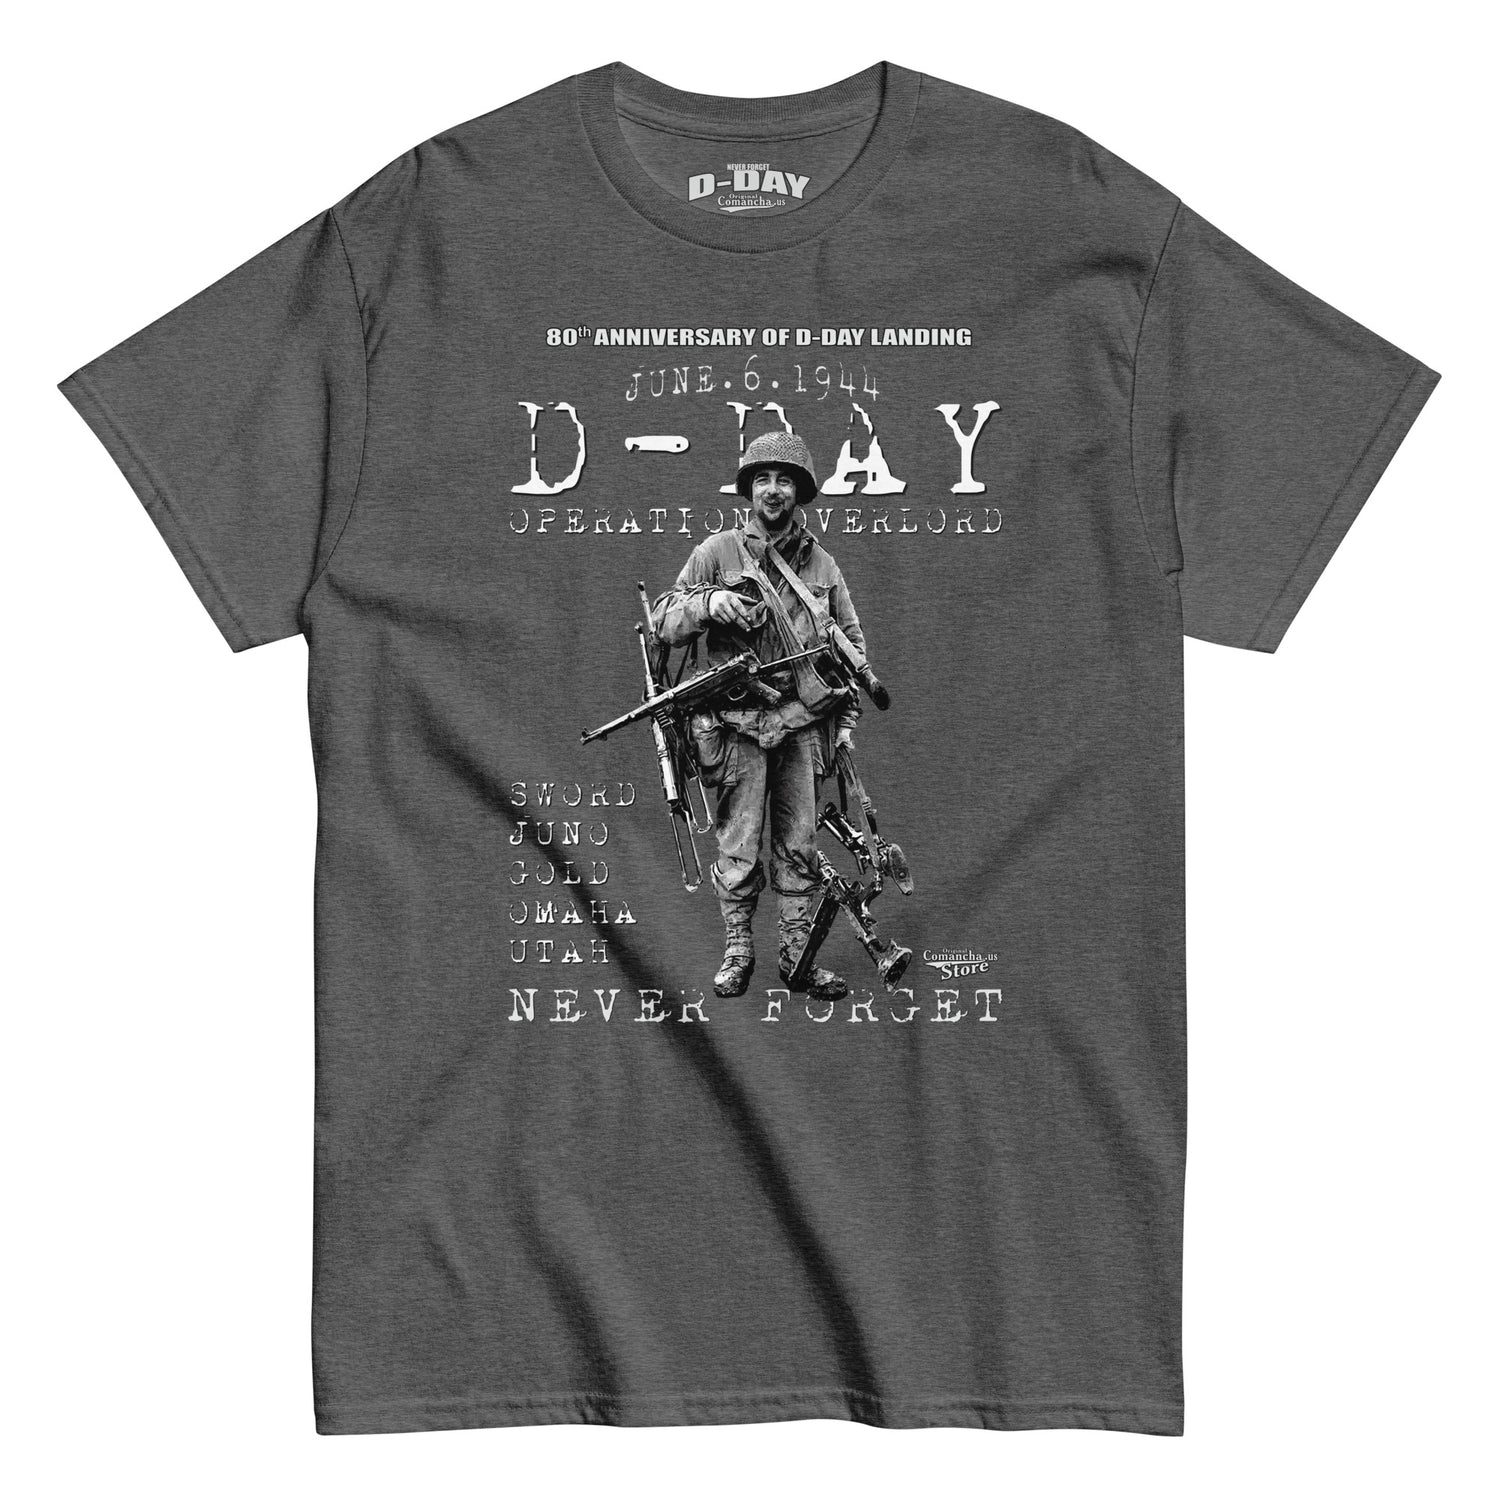 D-Day - Operation Overlord 1944 T-shirt, Comancha Store,